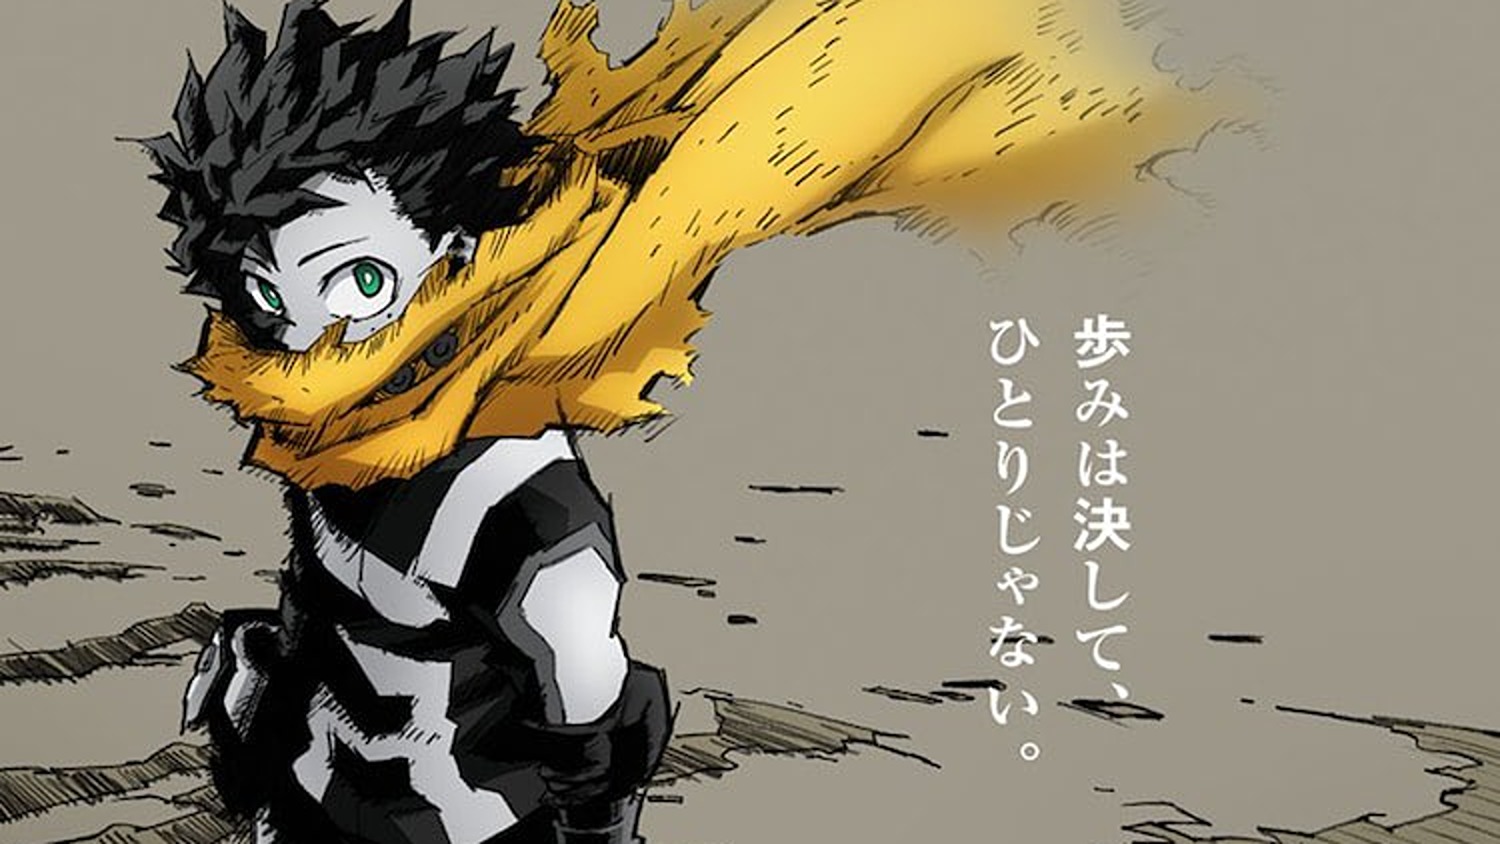 Error Forces My Hero Academia to Withdraw Latest Popularity Poll Results